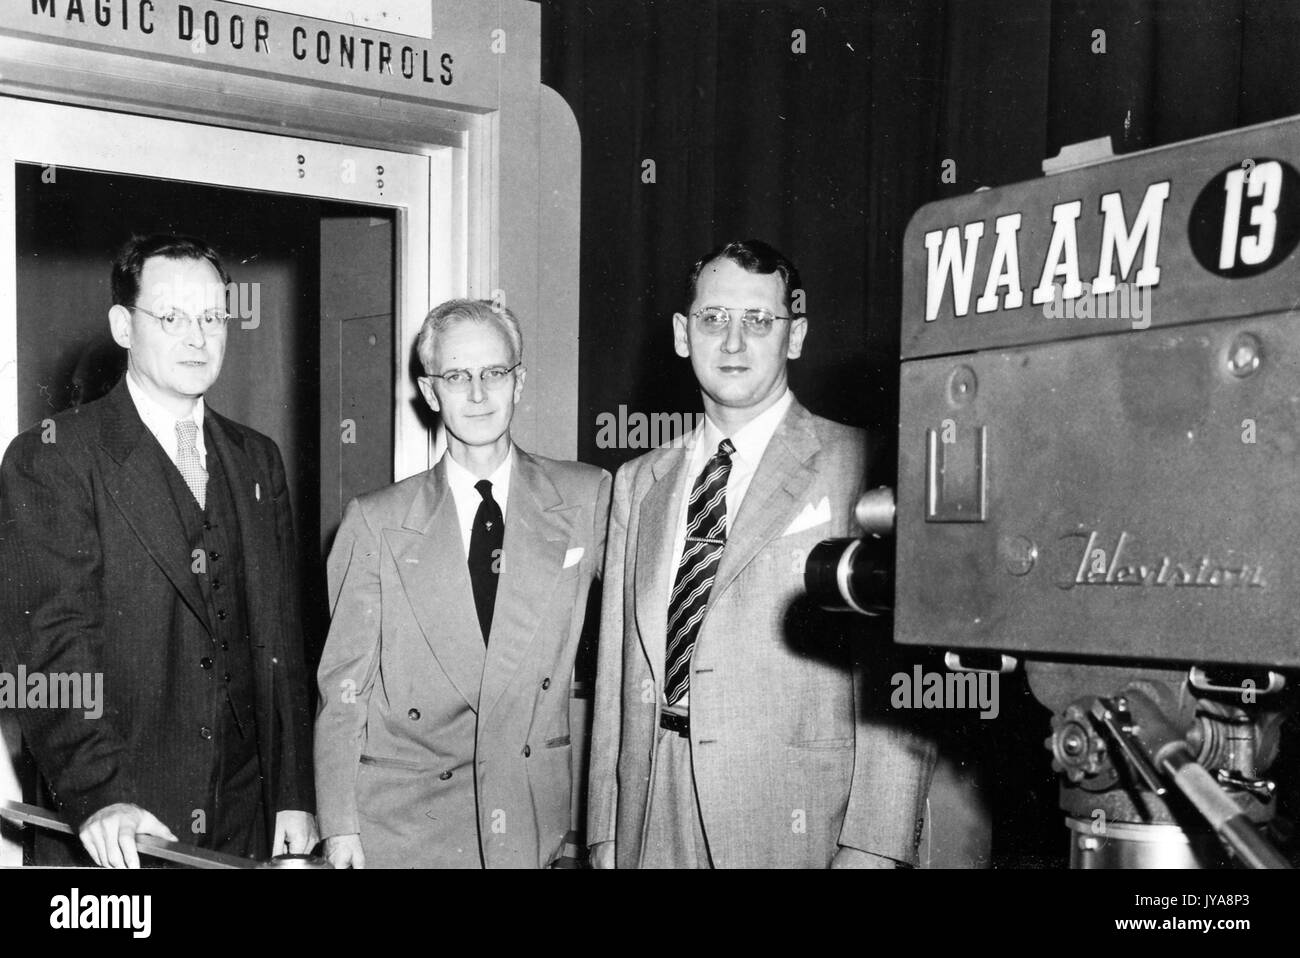 American television host Lynn Poole (center) on set of the Johns Hopkins Television Review program with guests Joe Tlanda and Chas Nichols, with Magic Door Controls sign in the background, October, 1952. Stock Photo